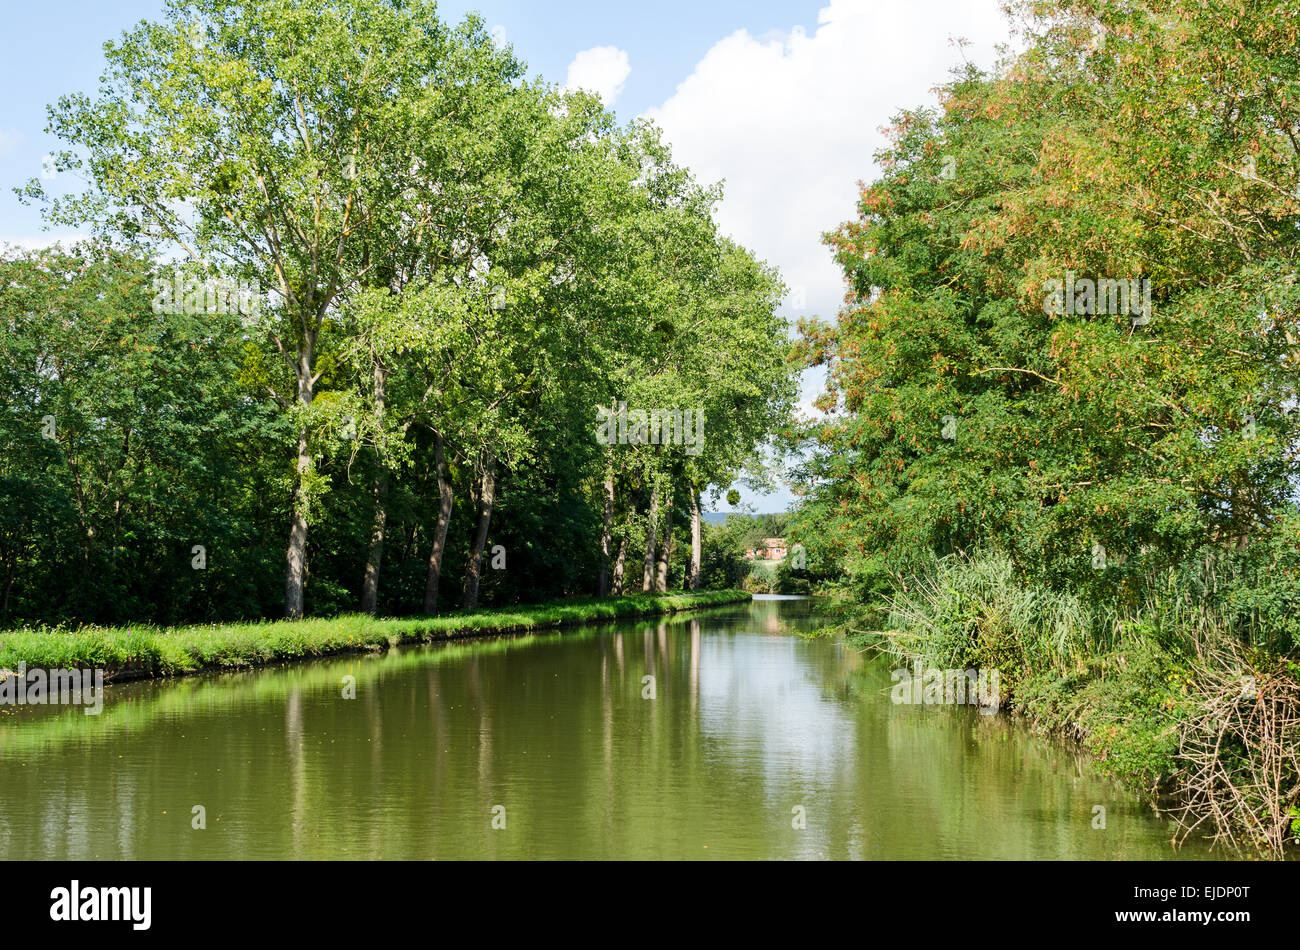 The Canal du Centre passes under a line of linden trees upriver from Fragnes, Burgundy, France. Stock Photo